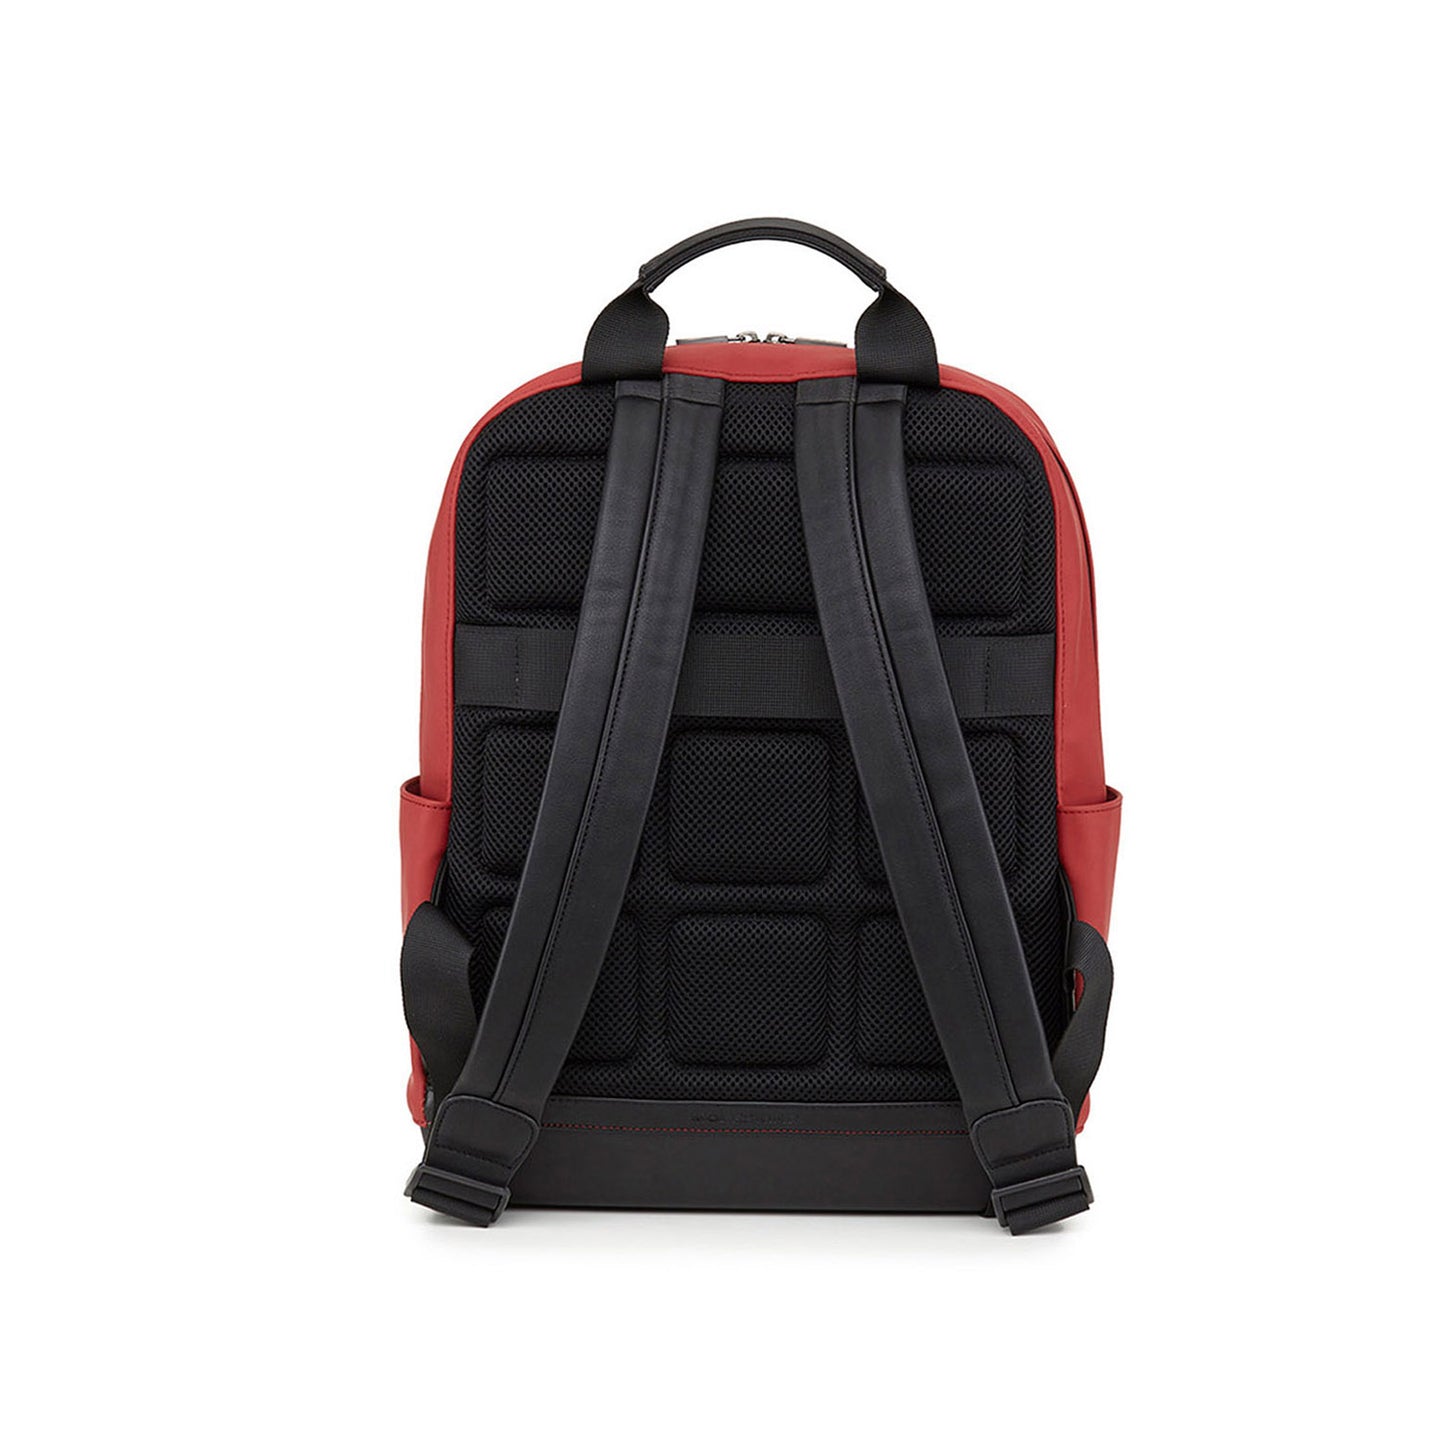 The Backpack Collection Soft Touch Burgundy Red